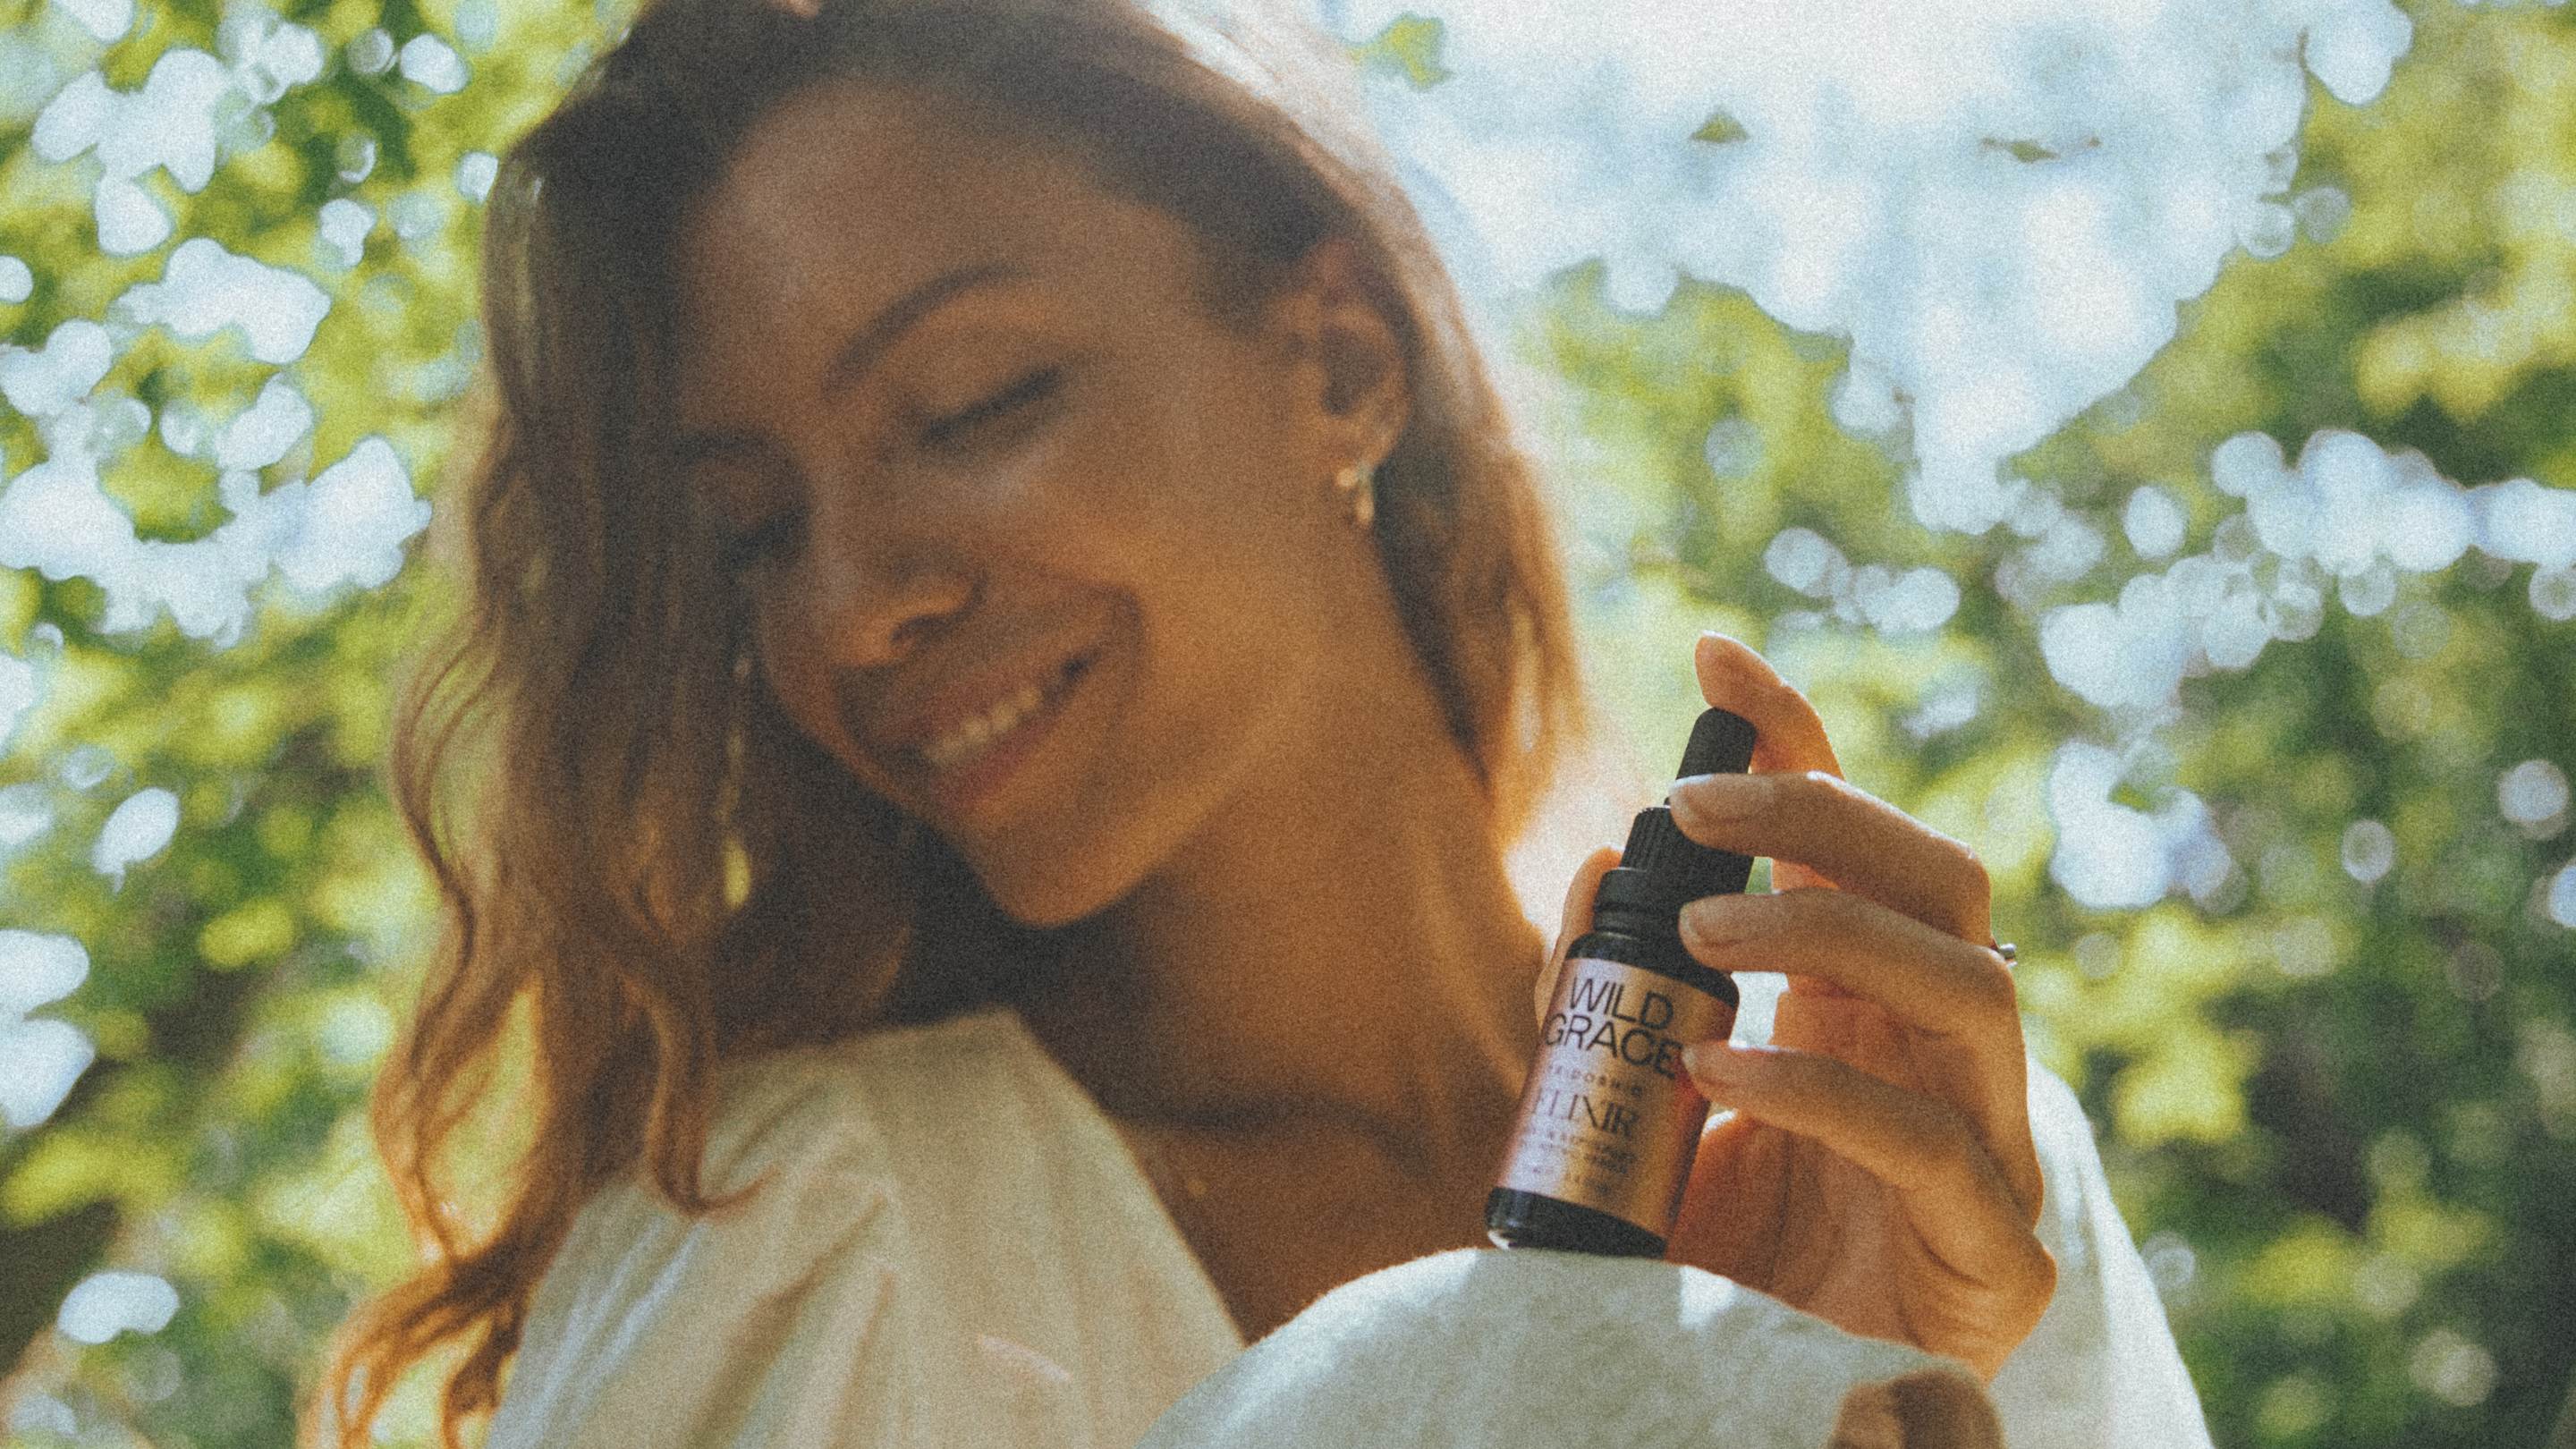 WILD GRACE natural skincare crafted in Montreal, Canada. Cruelty-free, vegan, eco-luxe every day rituals.